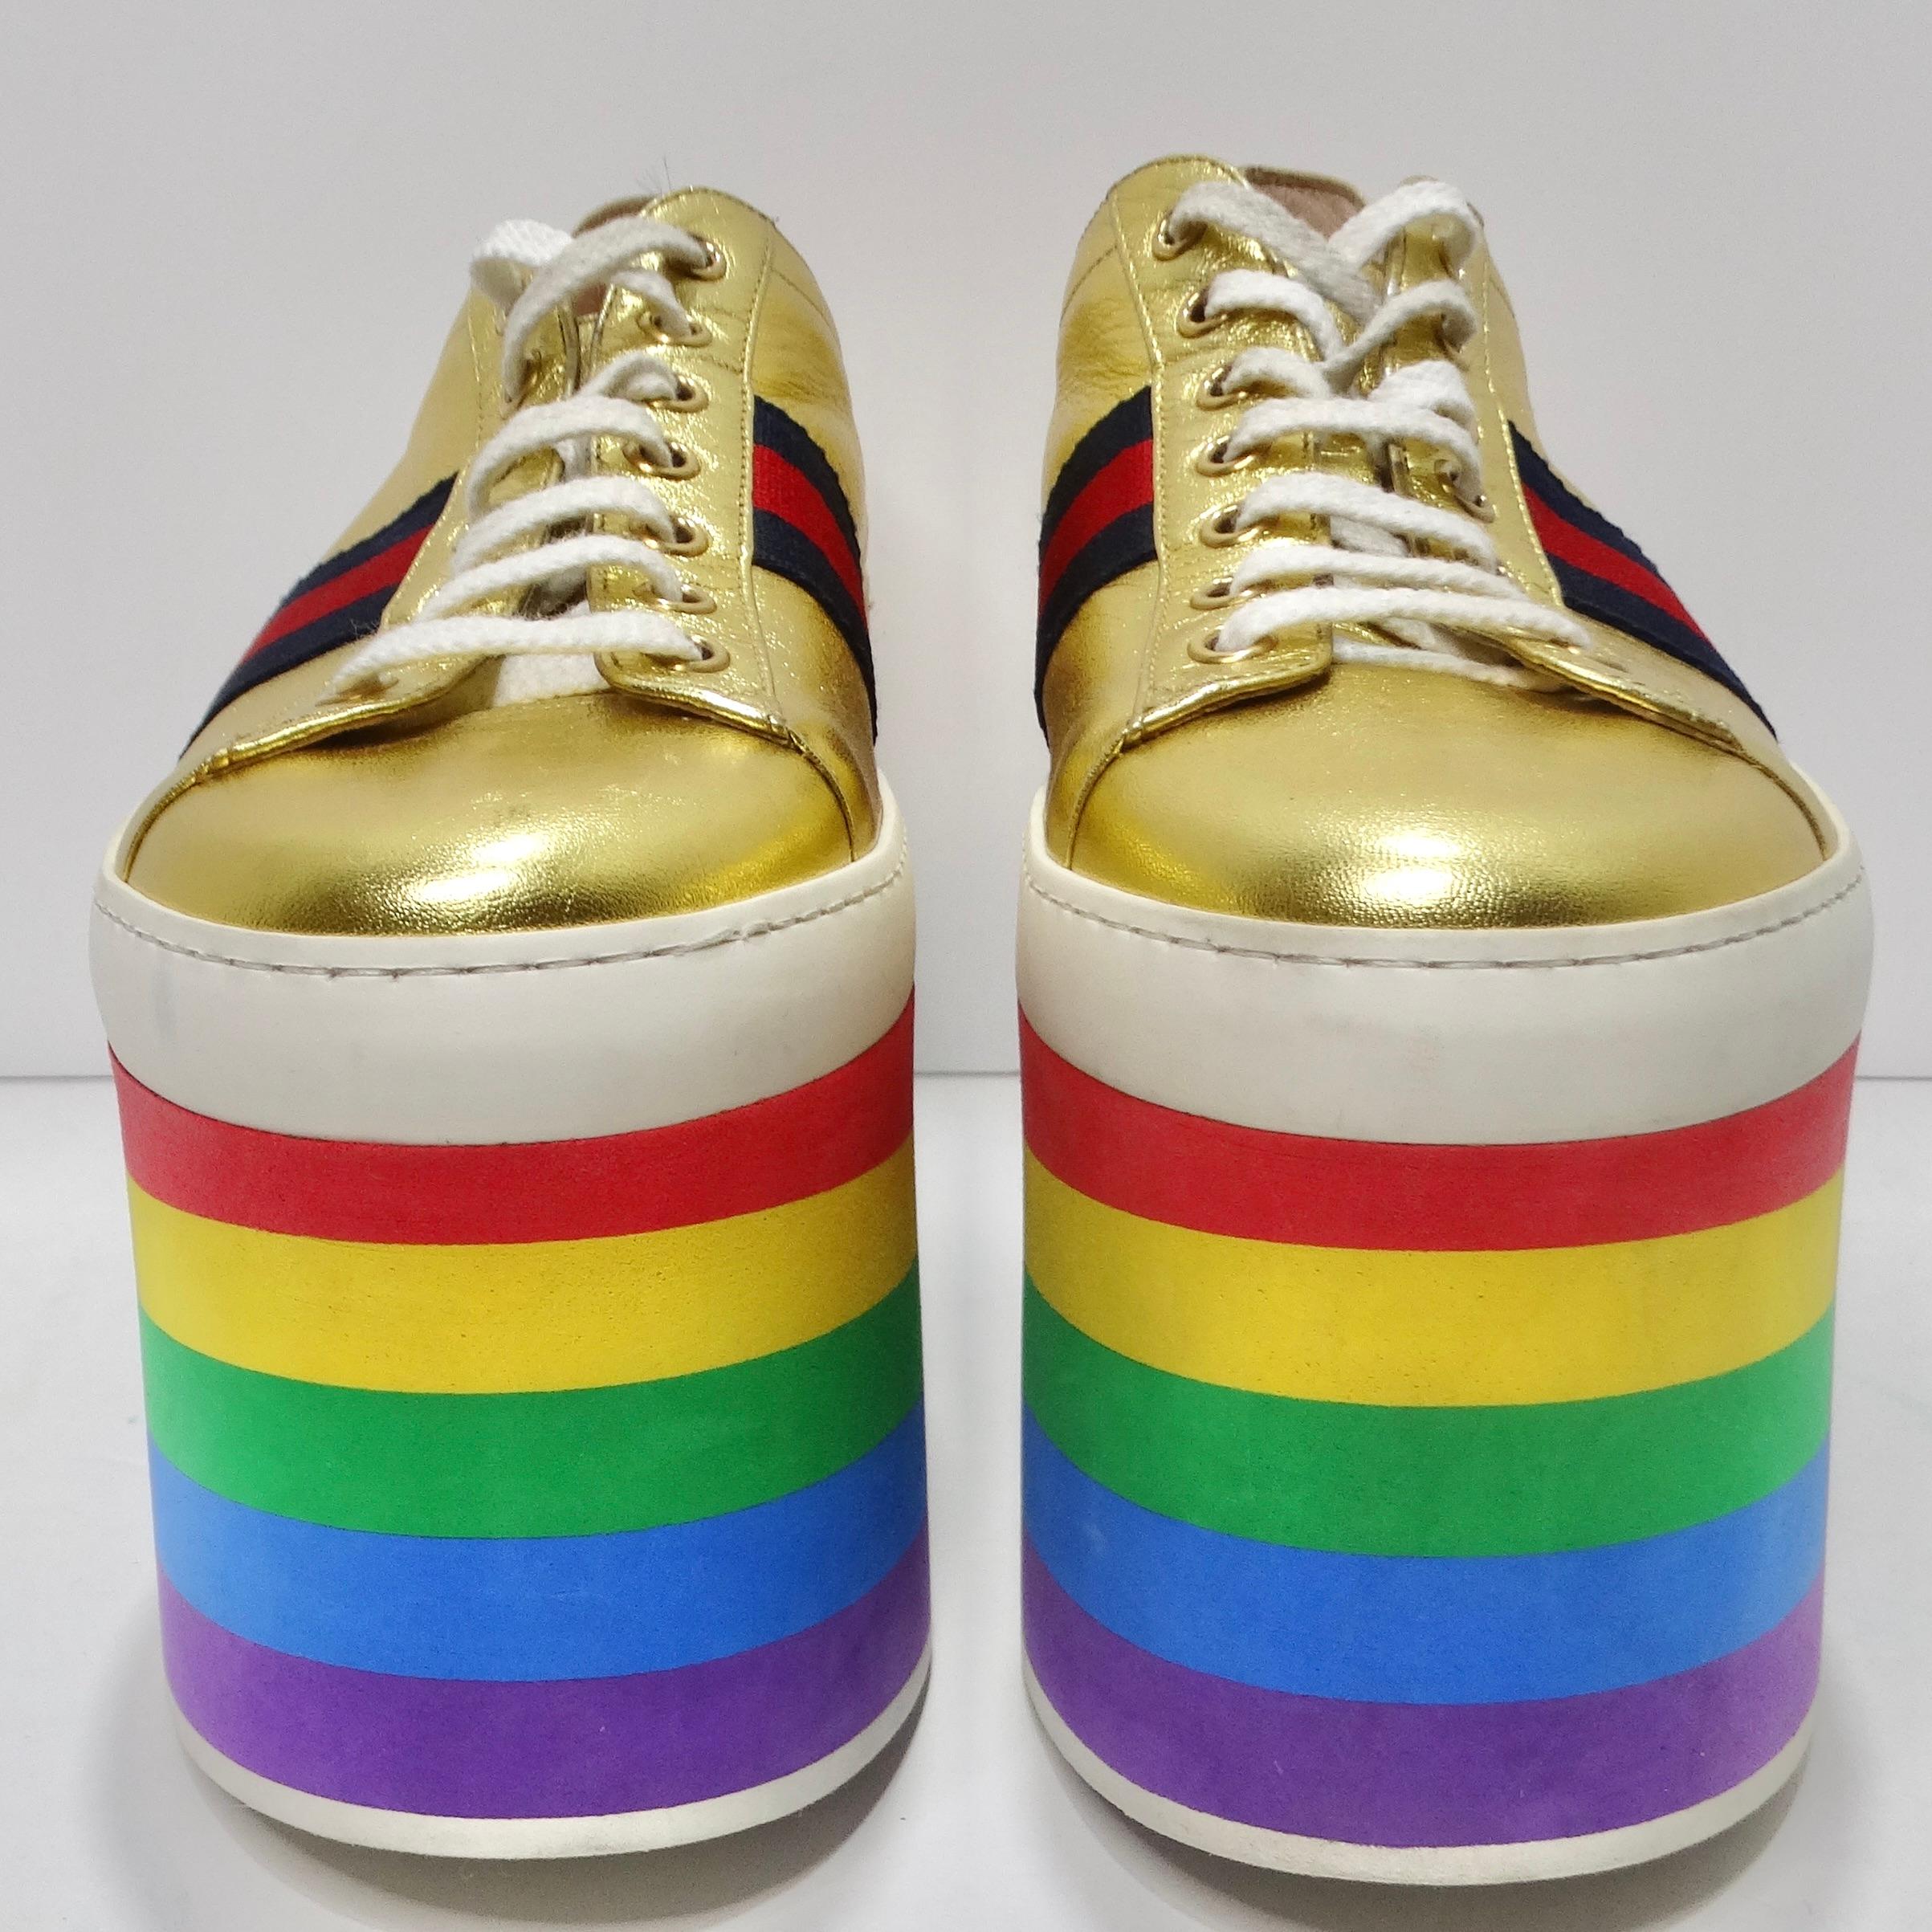 Women's or Men's Gucci Peggy Rainbow Platform Sneakers For Sale